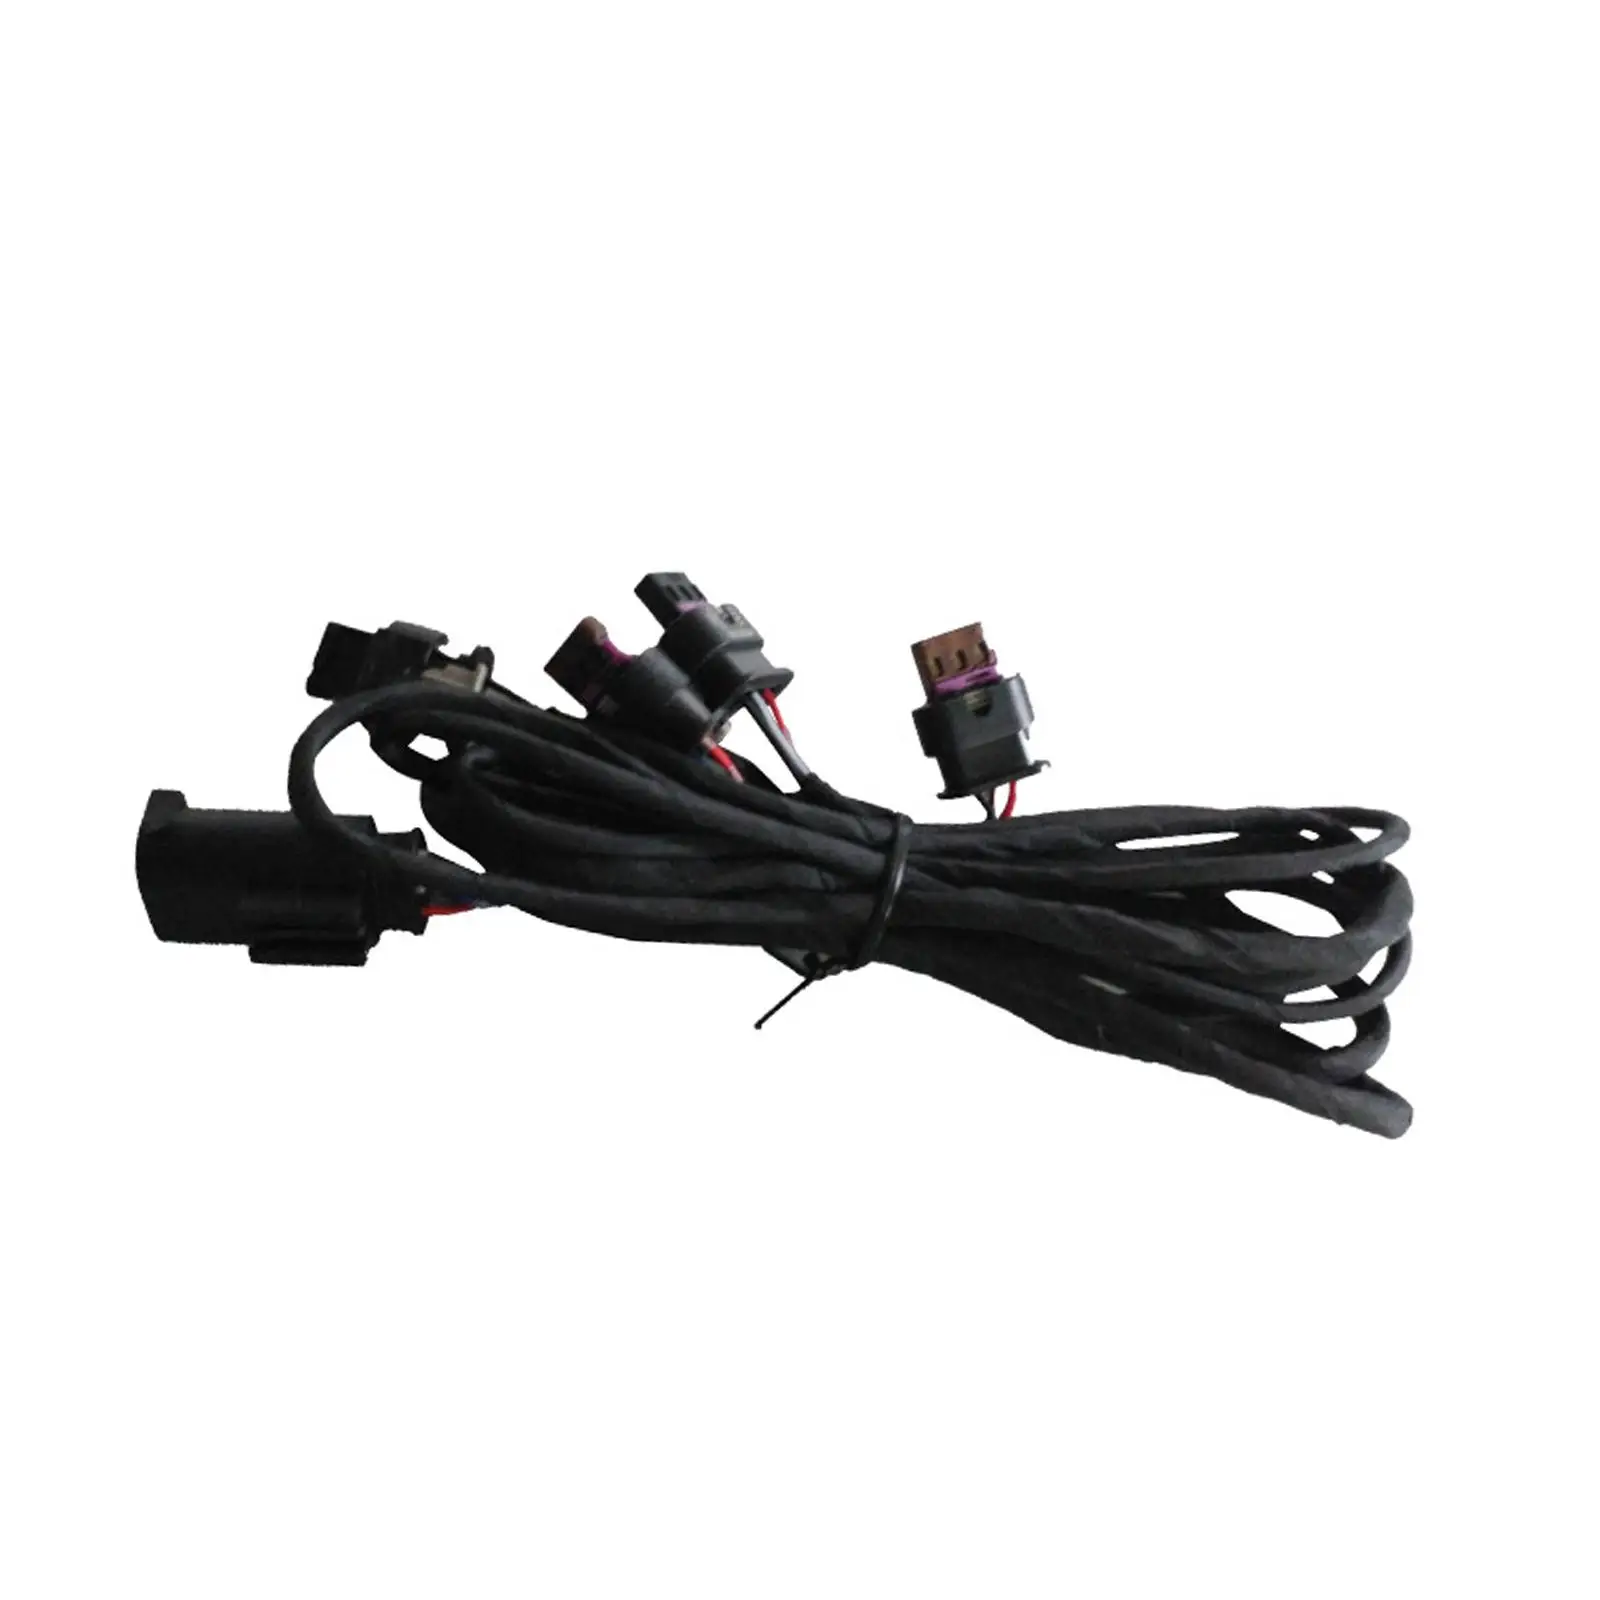 Bumper Parking Sensor Cables 61129313607 Auto Accessory Replacement of for bmw 3 Series 4 Series F80 M3 Lci F33 Lci F34 GT F31